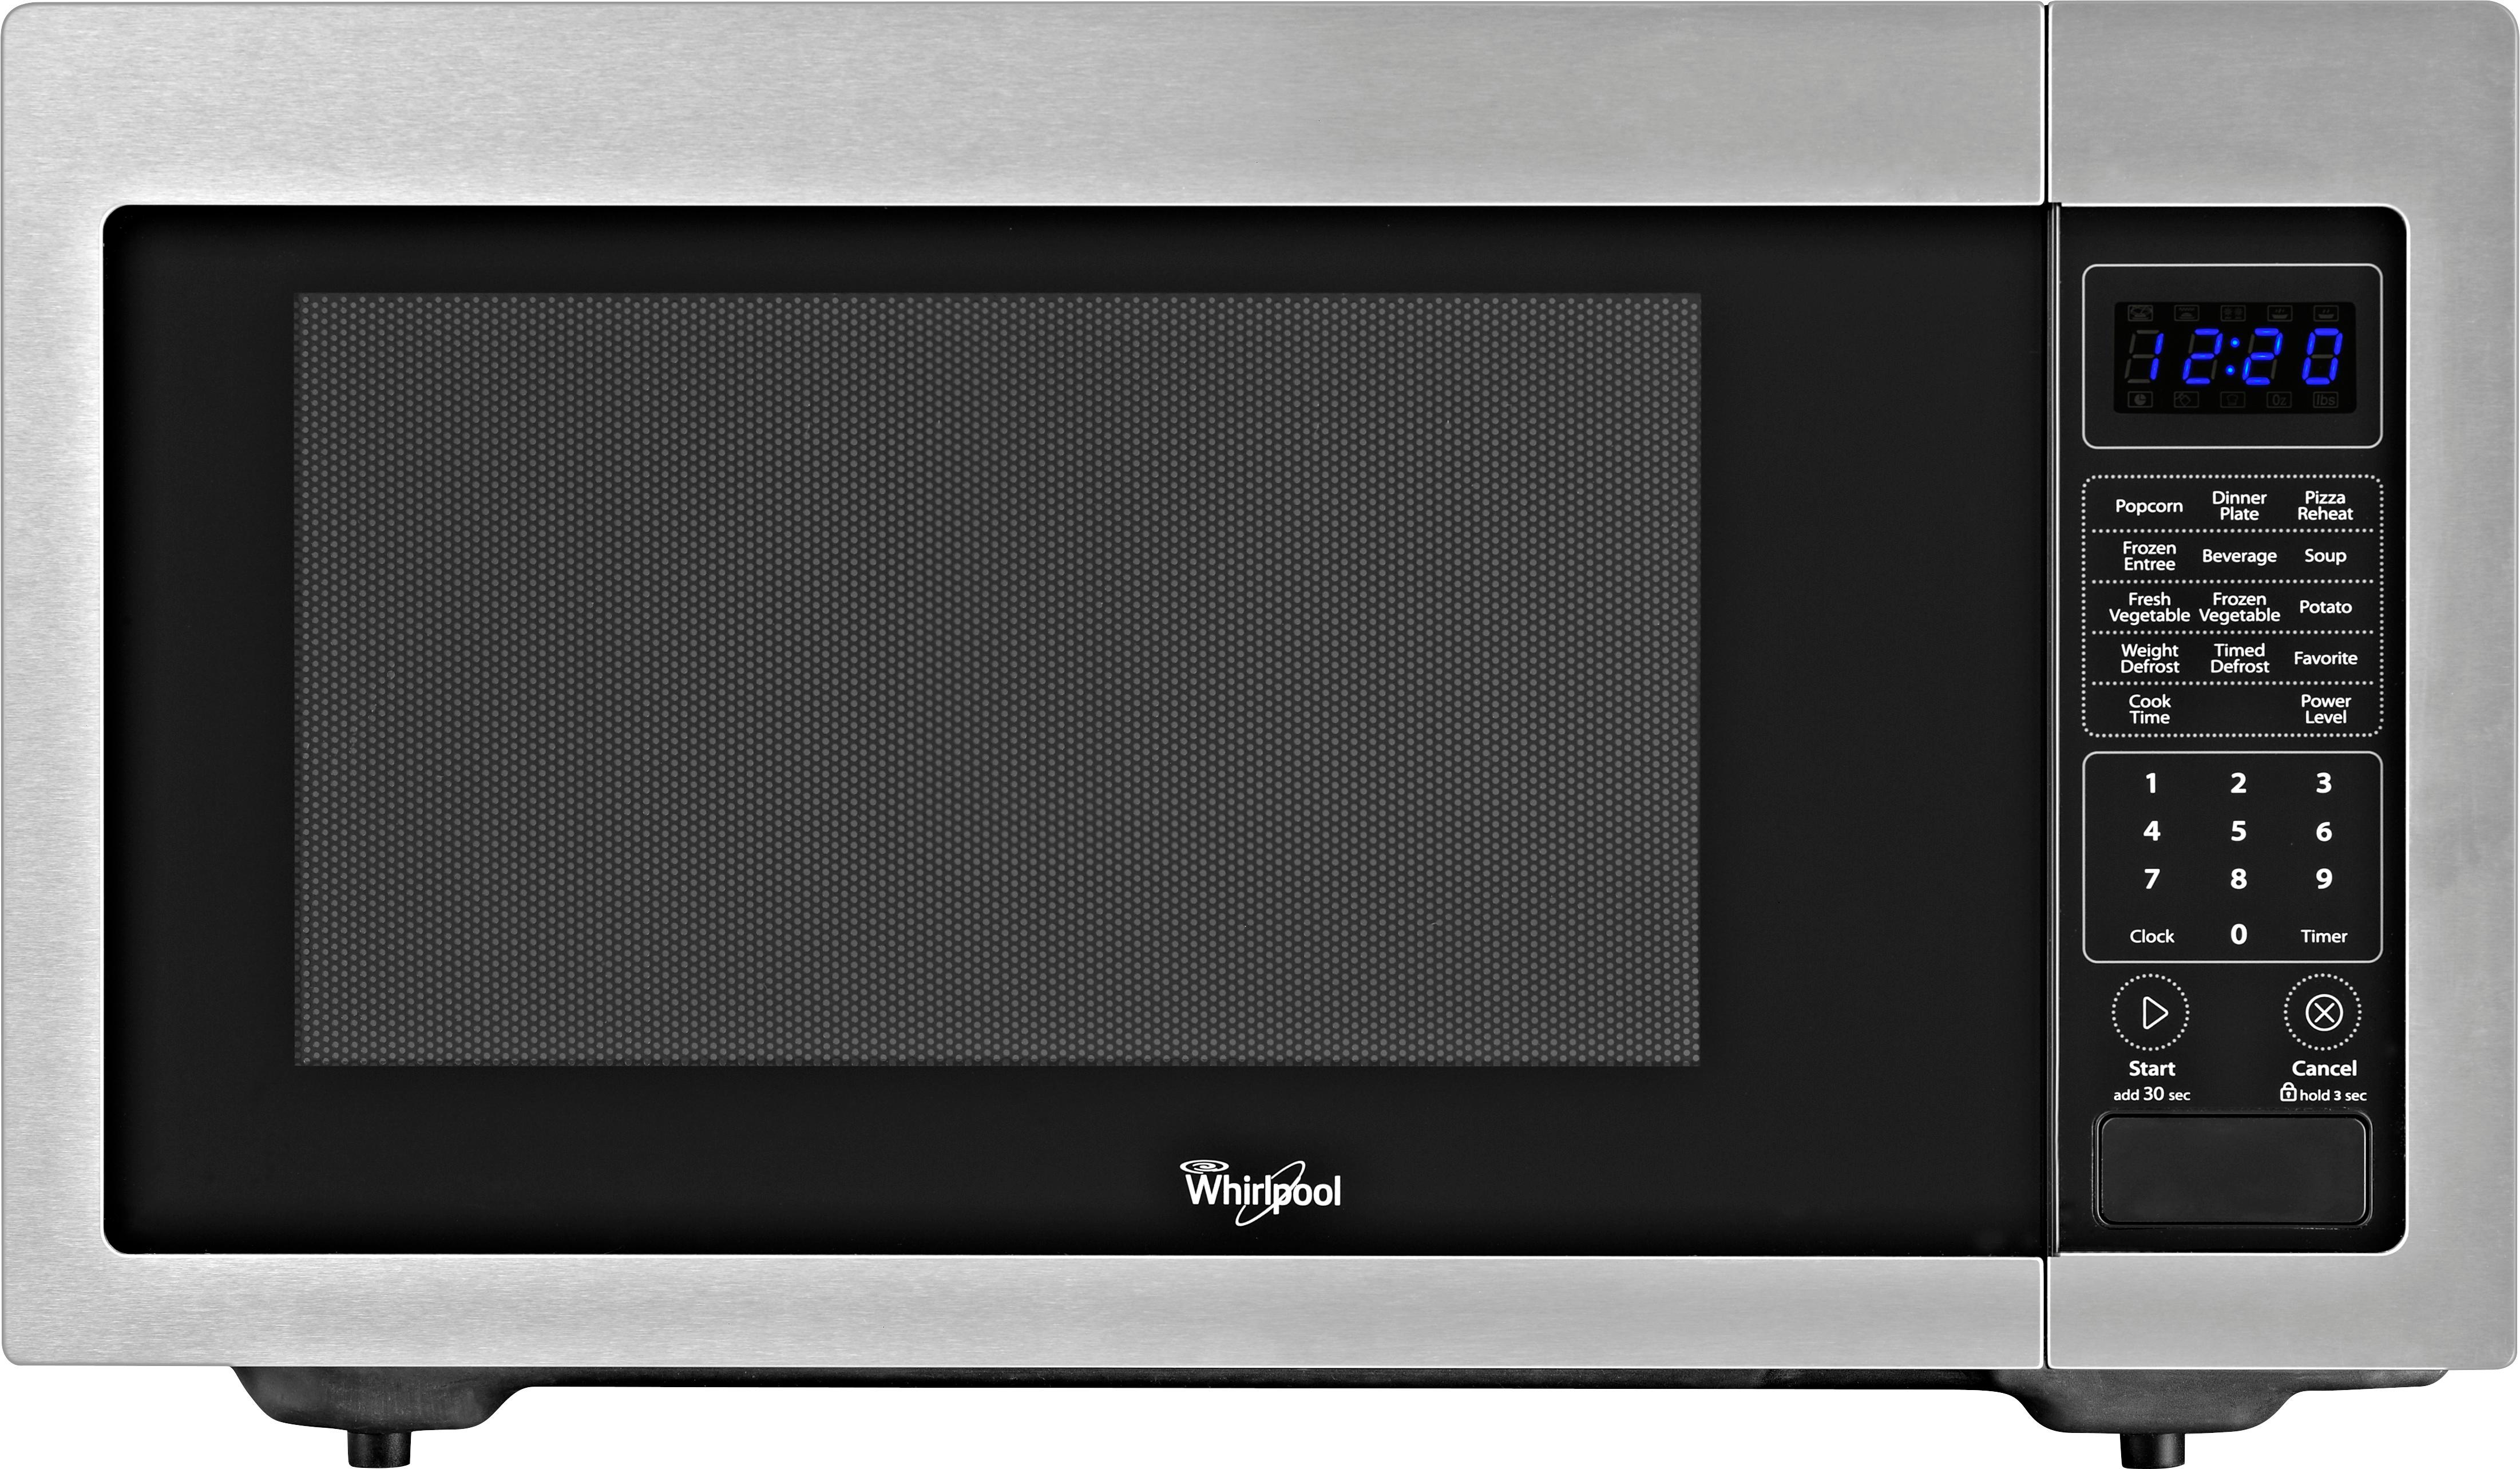 Best Buy: Whirlpool 1.6 Cu. Ft. Full-Size Microwave Black/Stainless